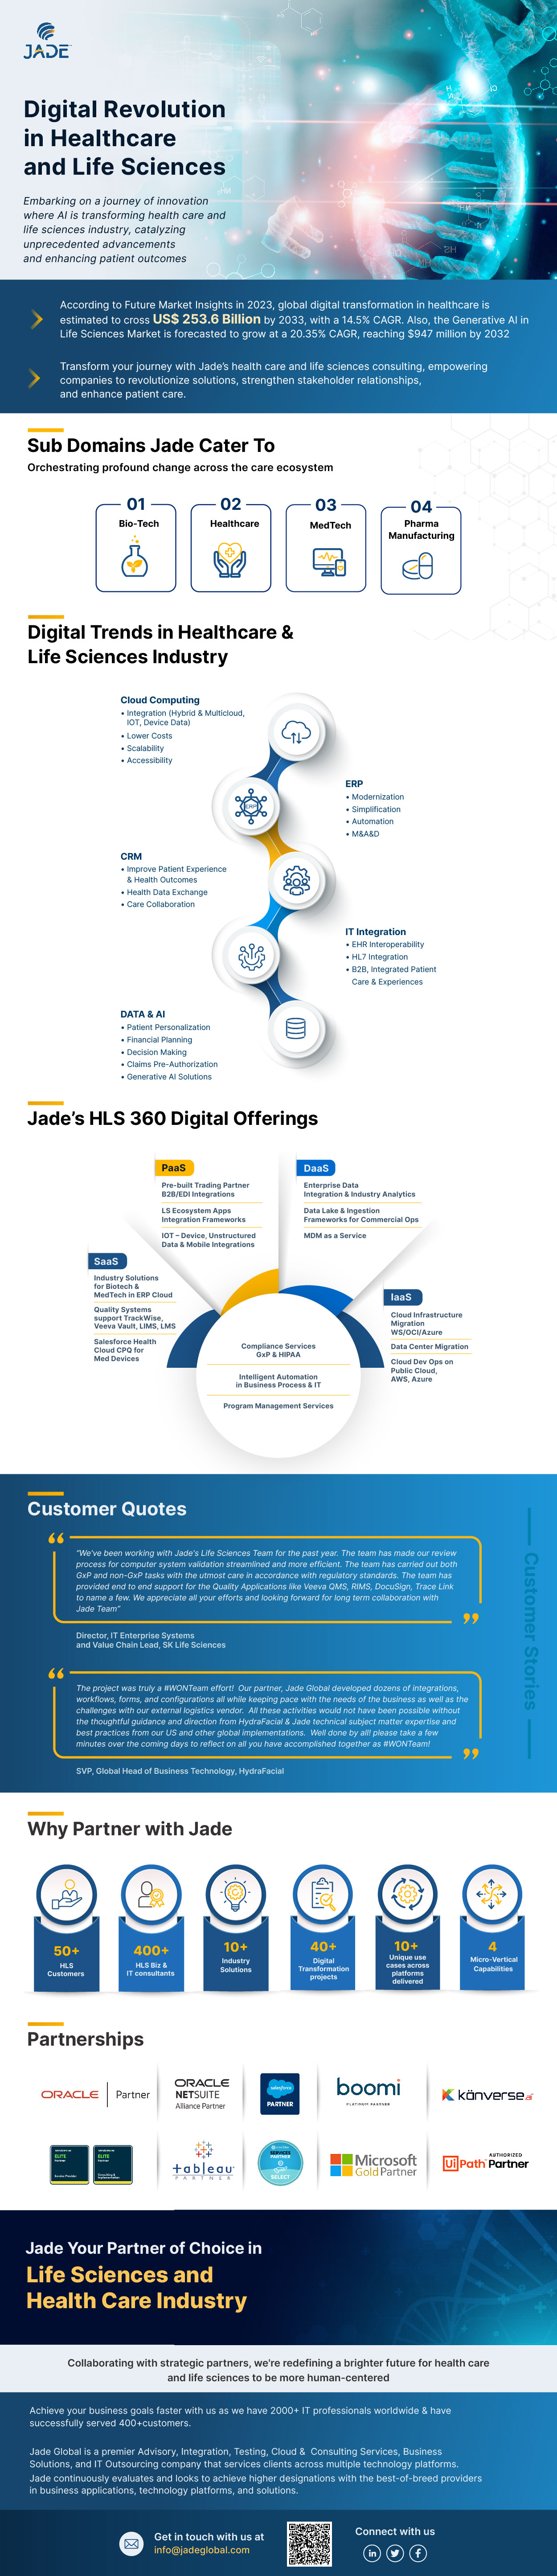 HLS Infographic